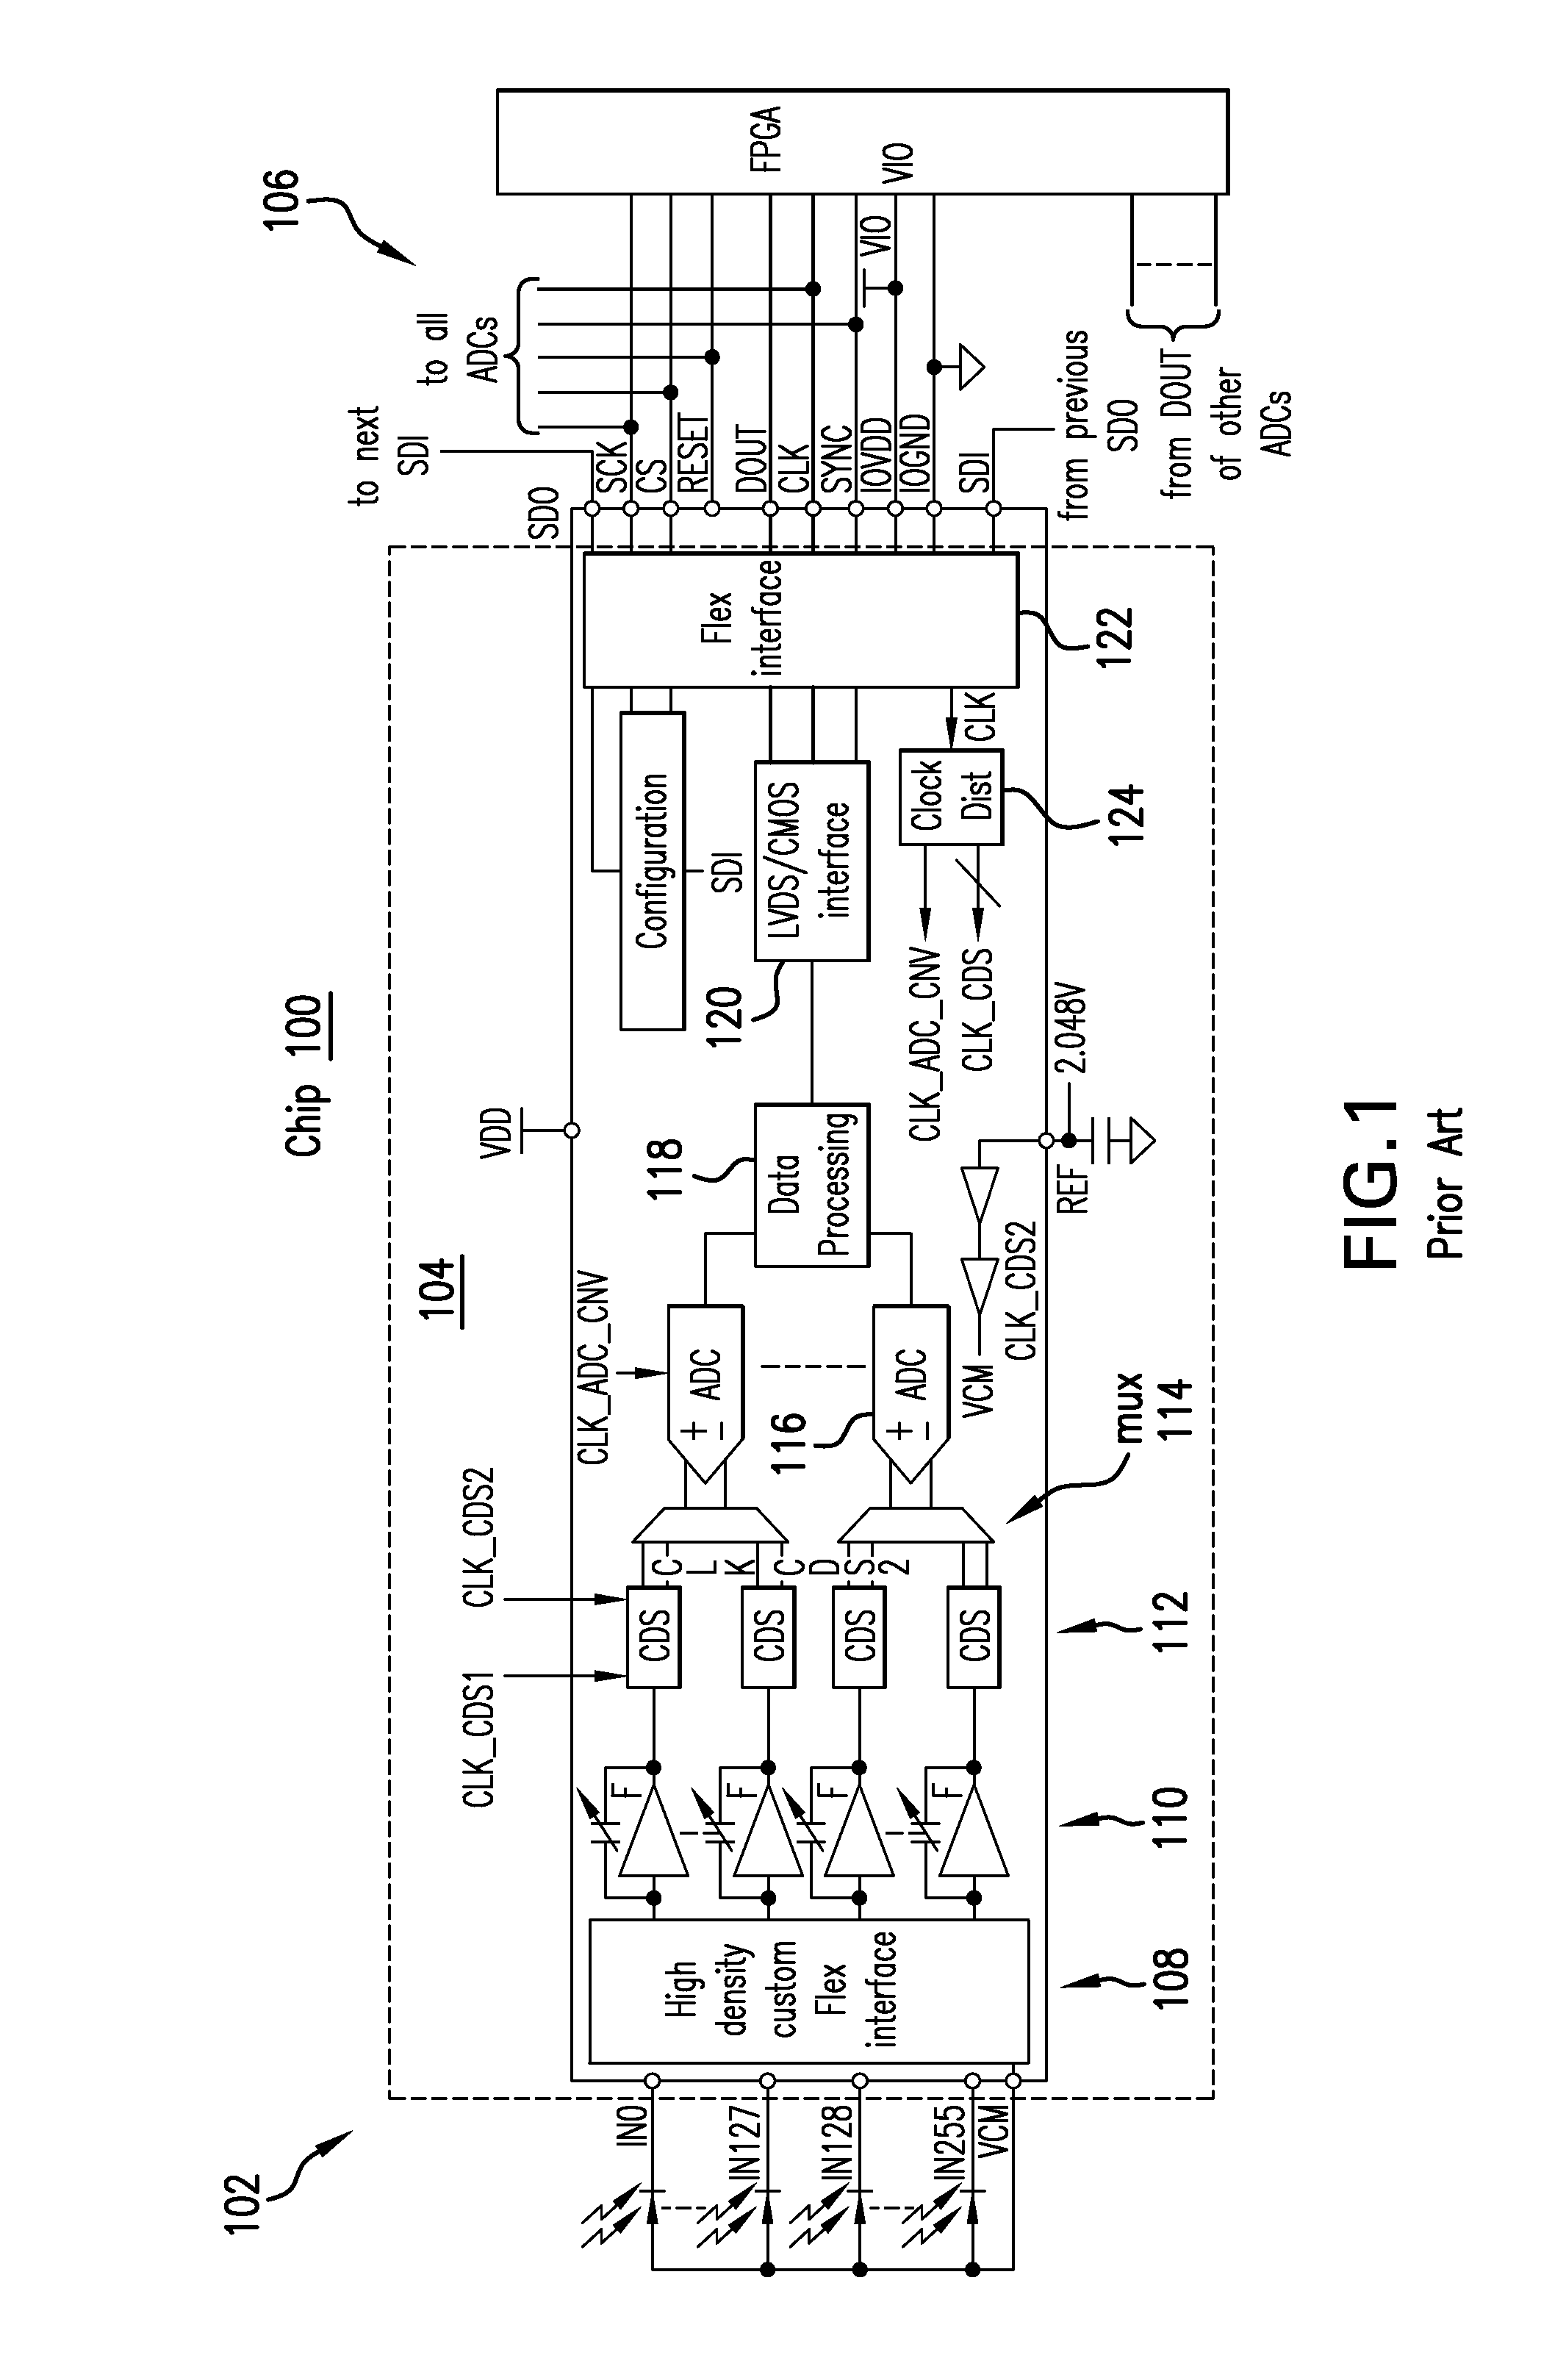 Opportunistic Timing Control in Mixed-Signal System-On-Chip Designs